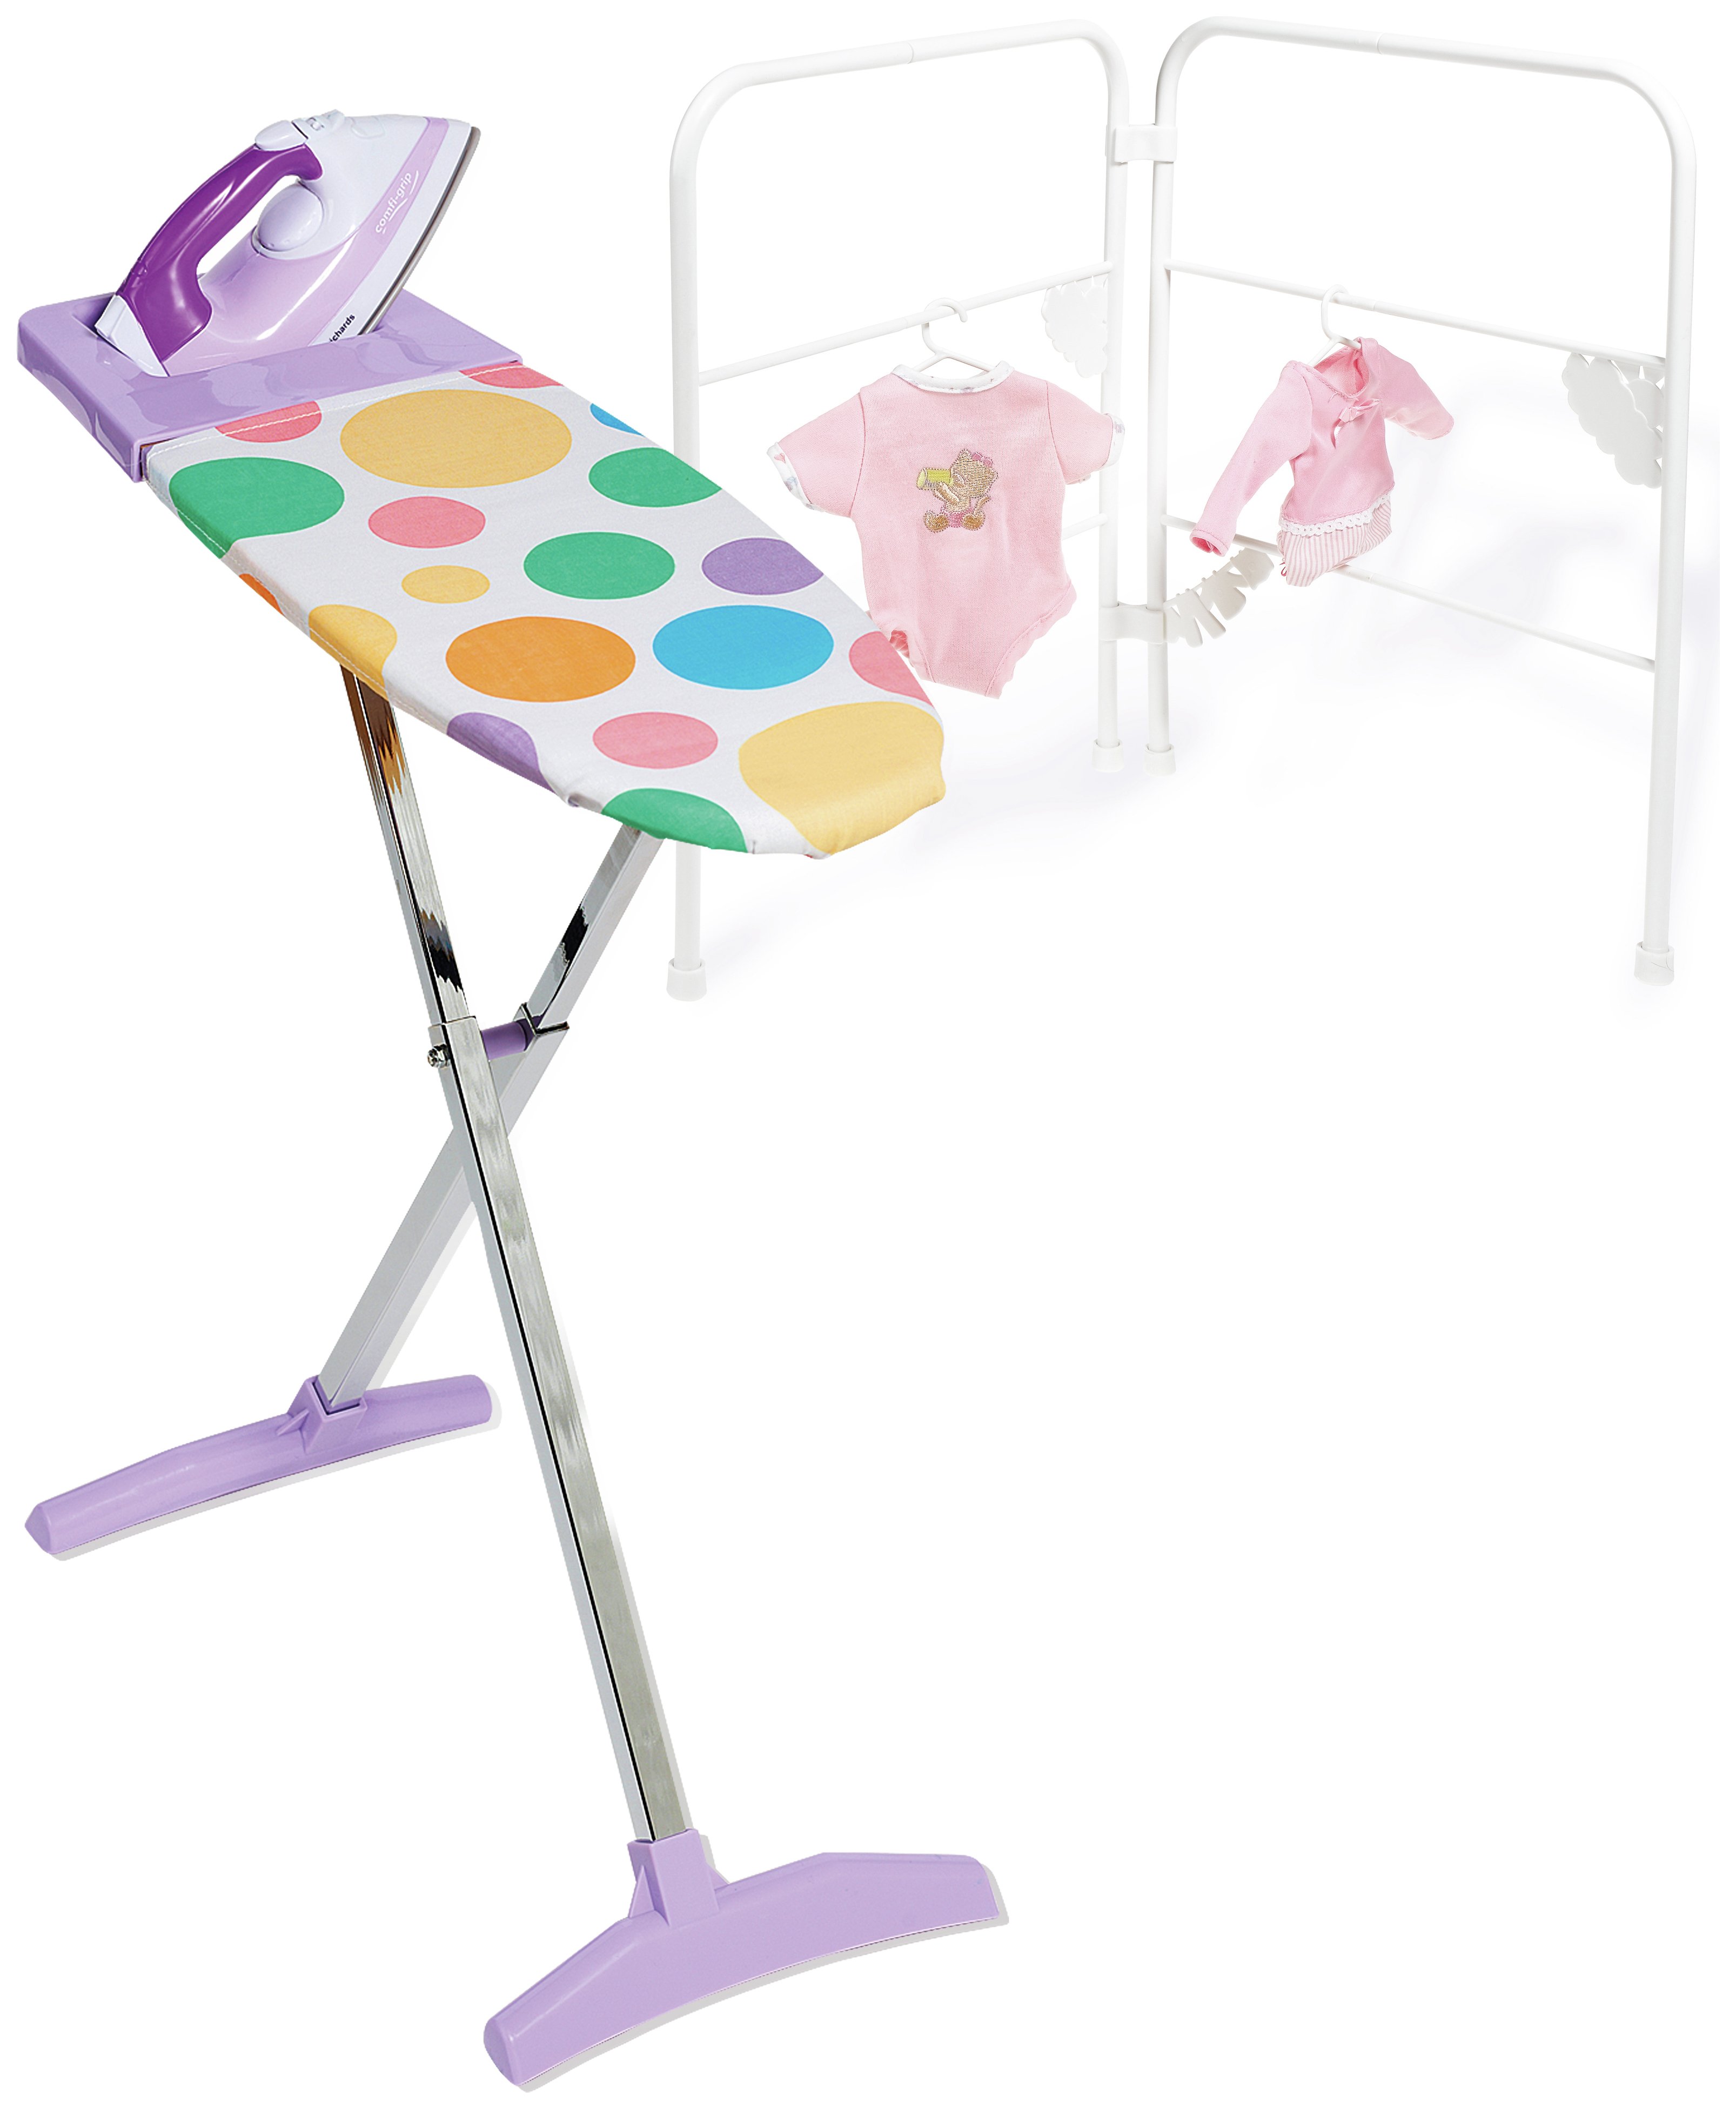 role play ironing board